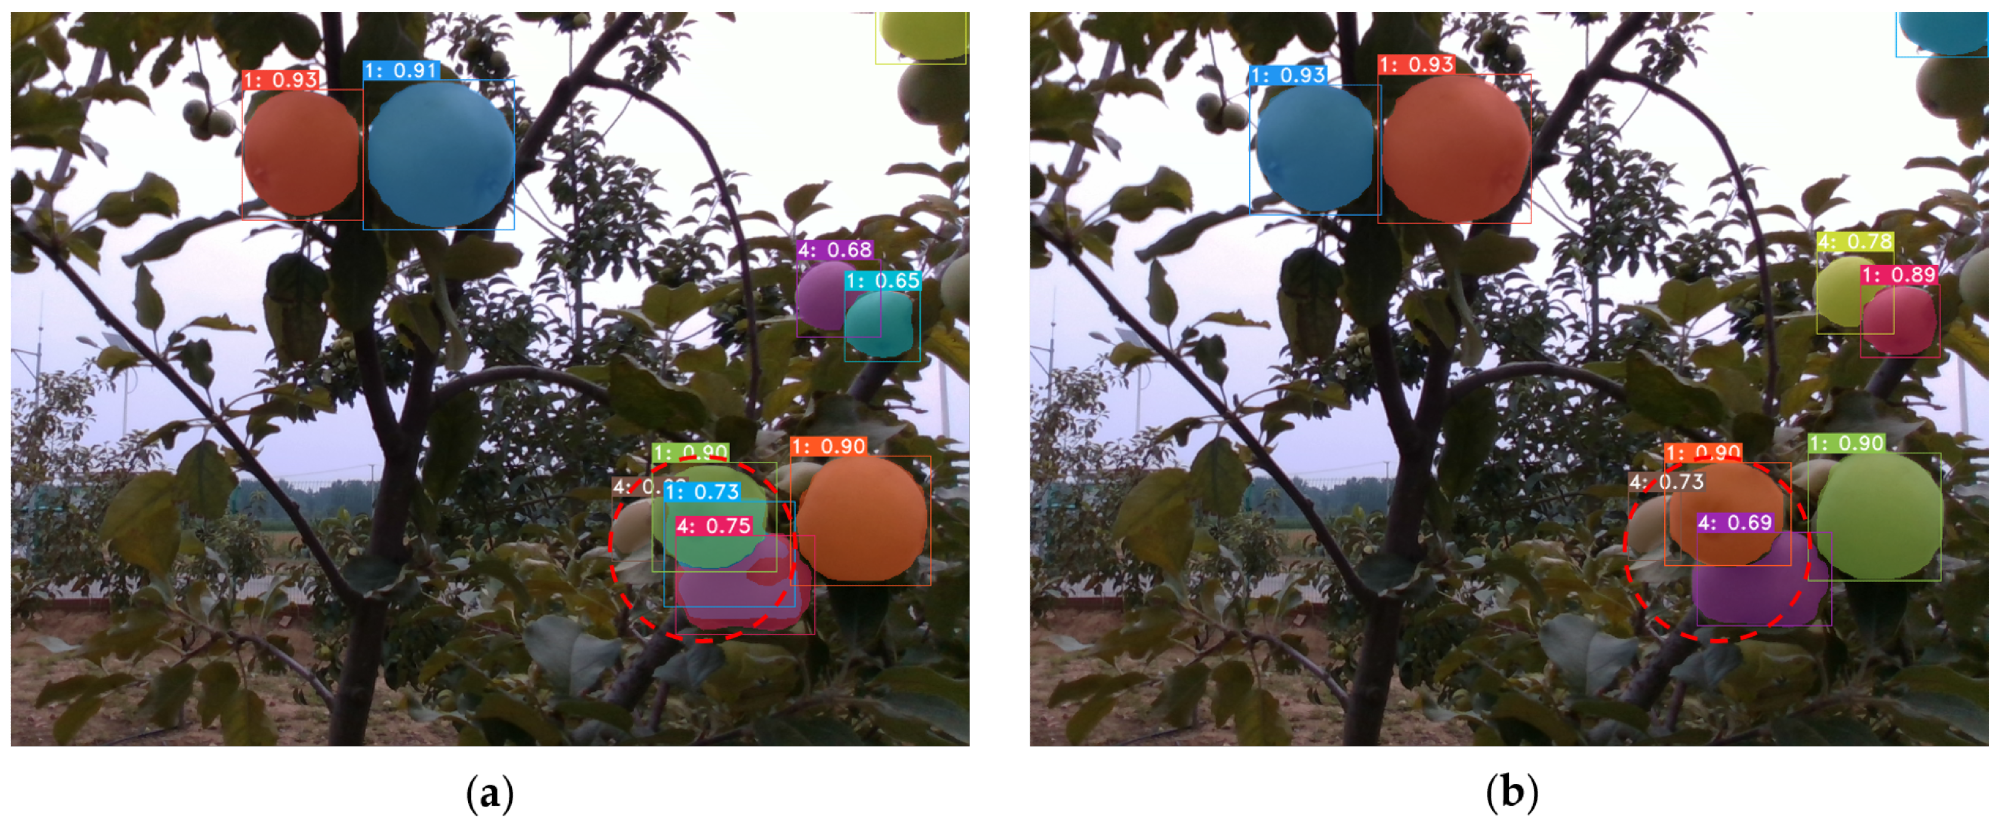 Performance of the detection and segmentation of YOLACT++ network in cloudy conditions. (a) ResNet-50; (b) ResNet-101.